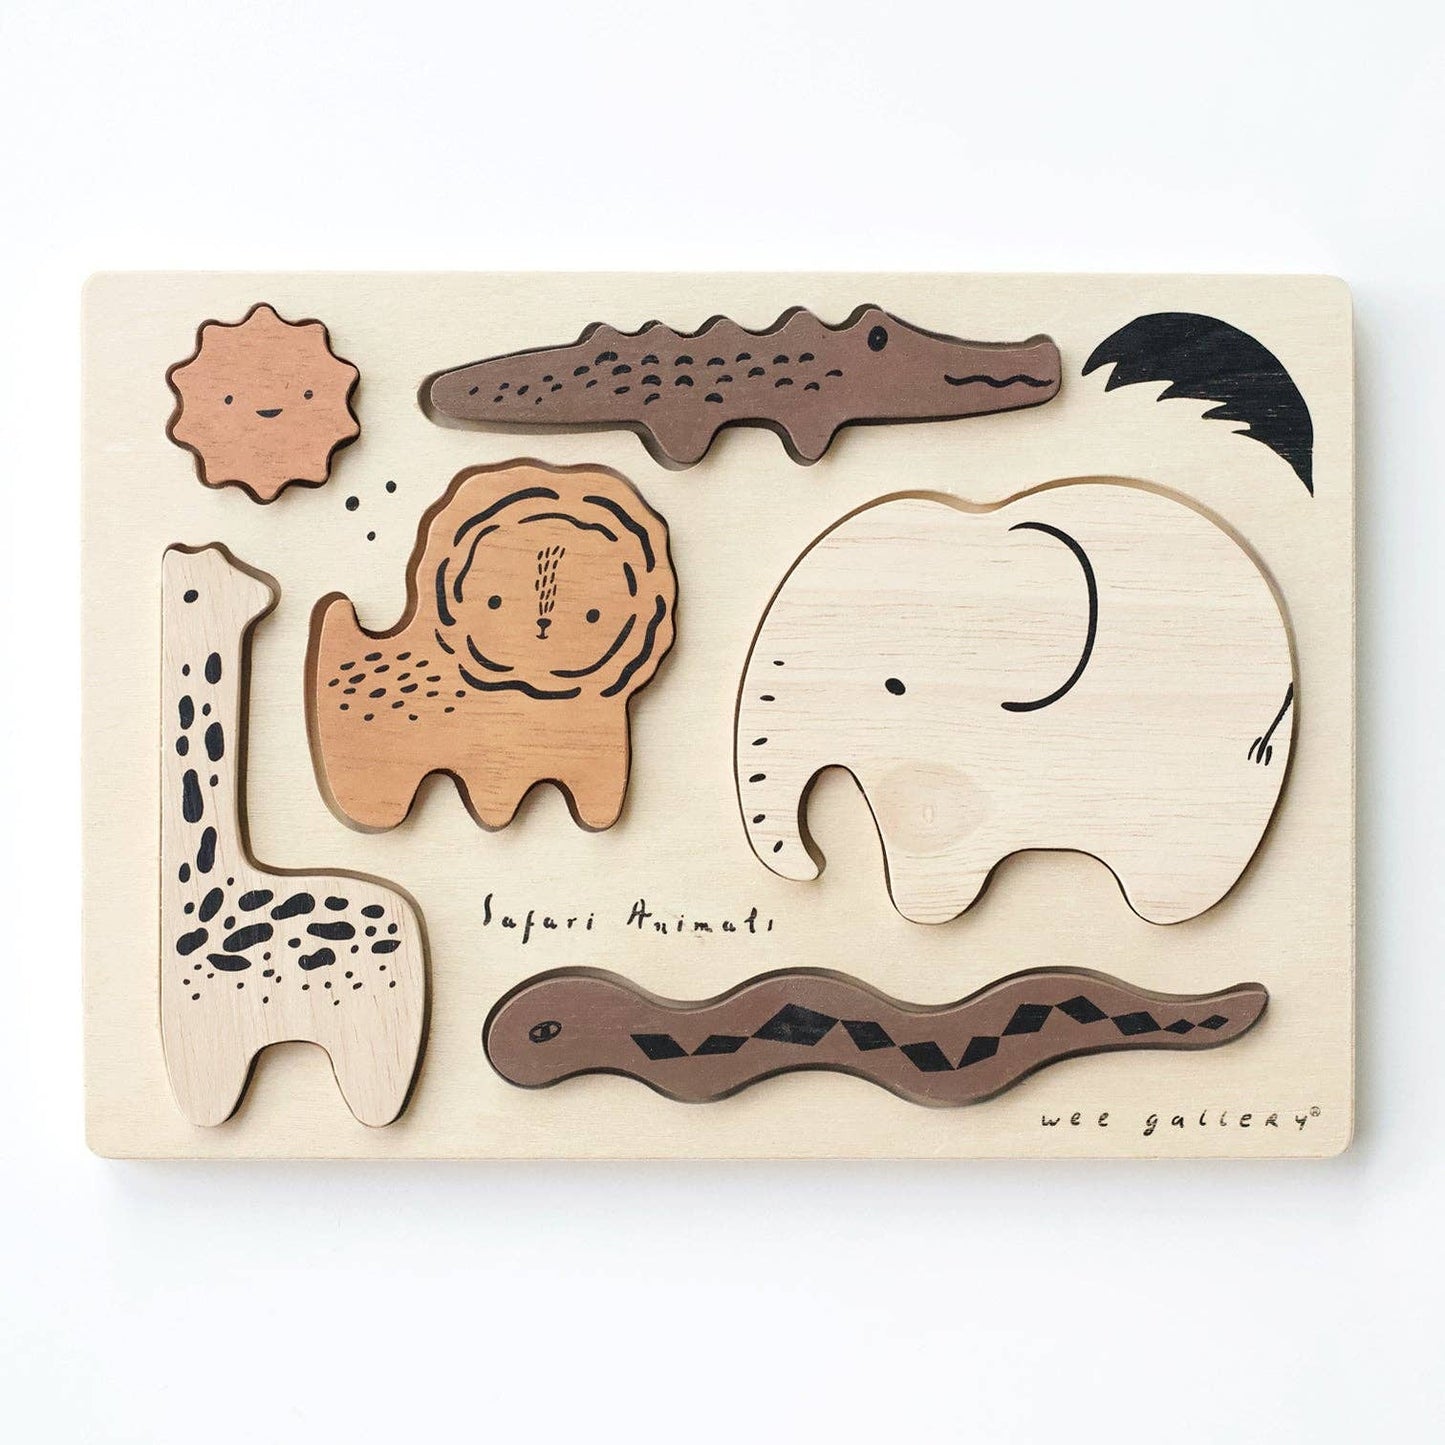 Wee Gallery wooden tray puzzle